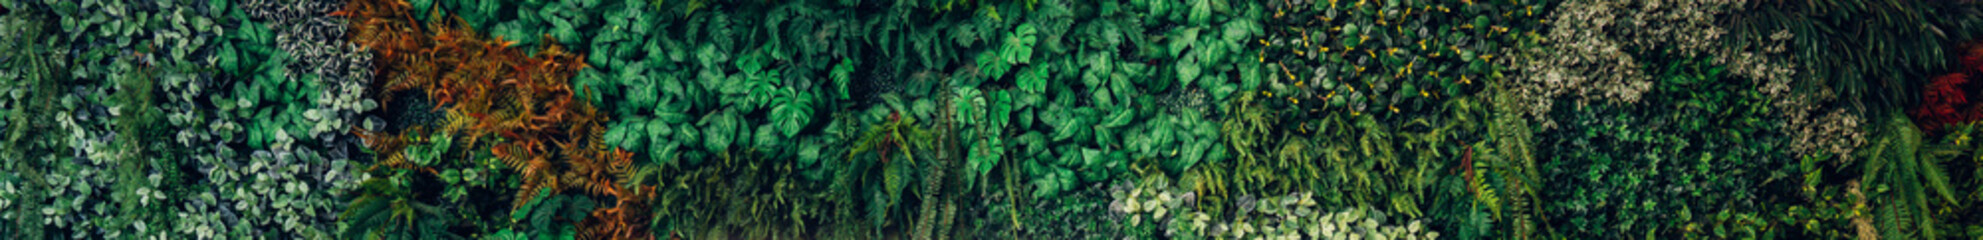 Close up group of background green leaves texture and Abstract Nature Background. Lush Foliage...